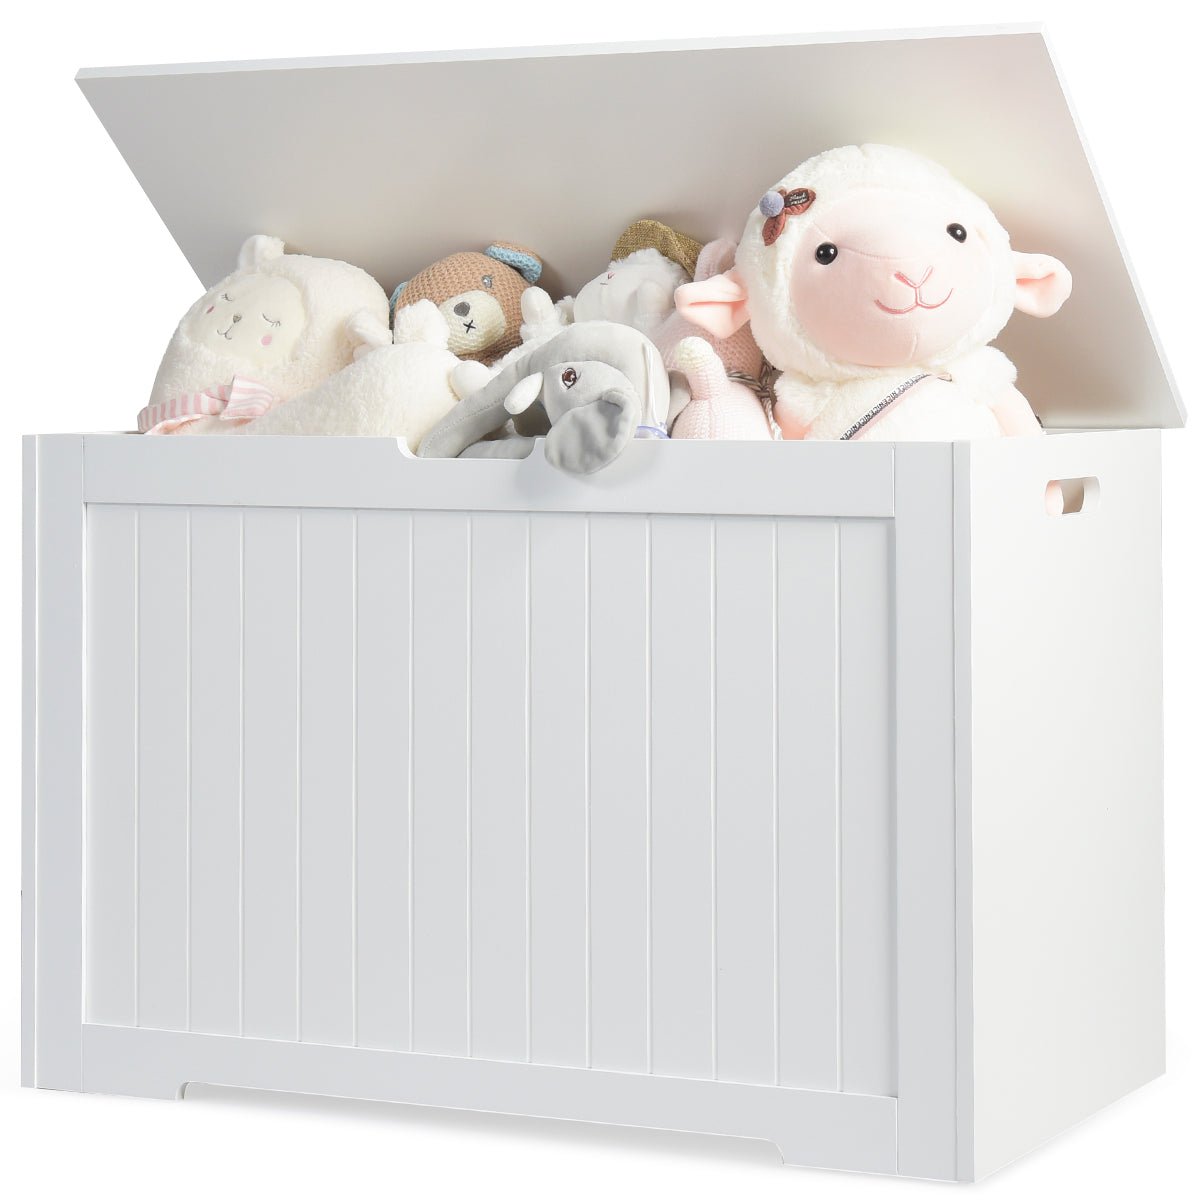 Flip Top Wooden Storage Trunk with Safety Hinge for Bedroom